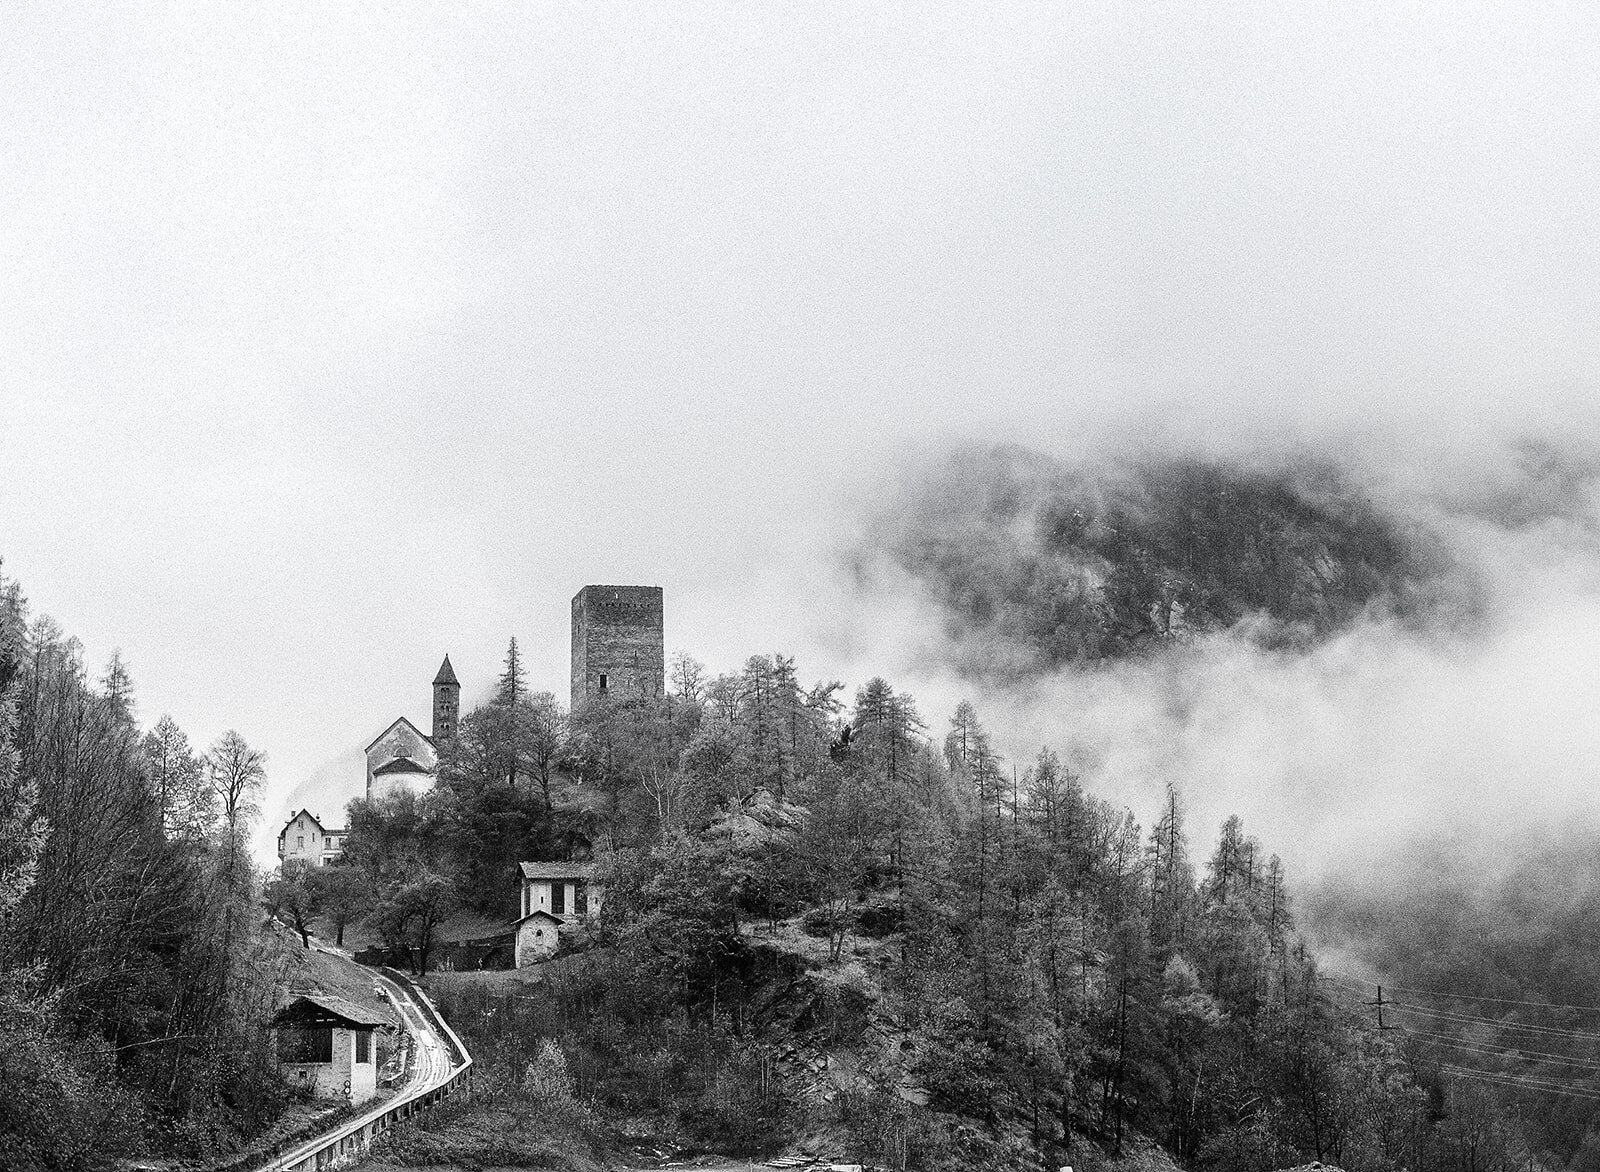 Black and white film photograph of village in the Alps surrounded by fog and mist.